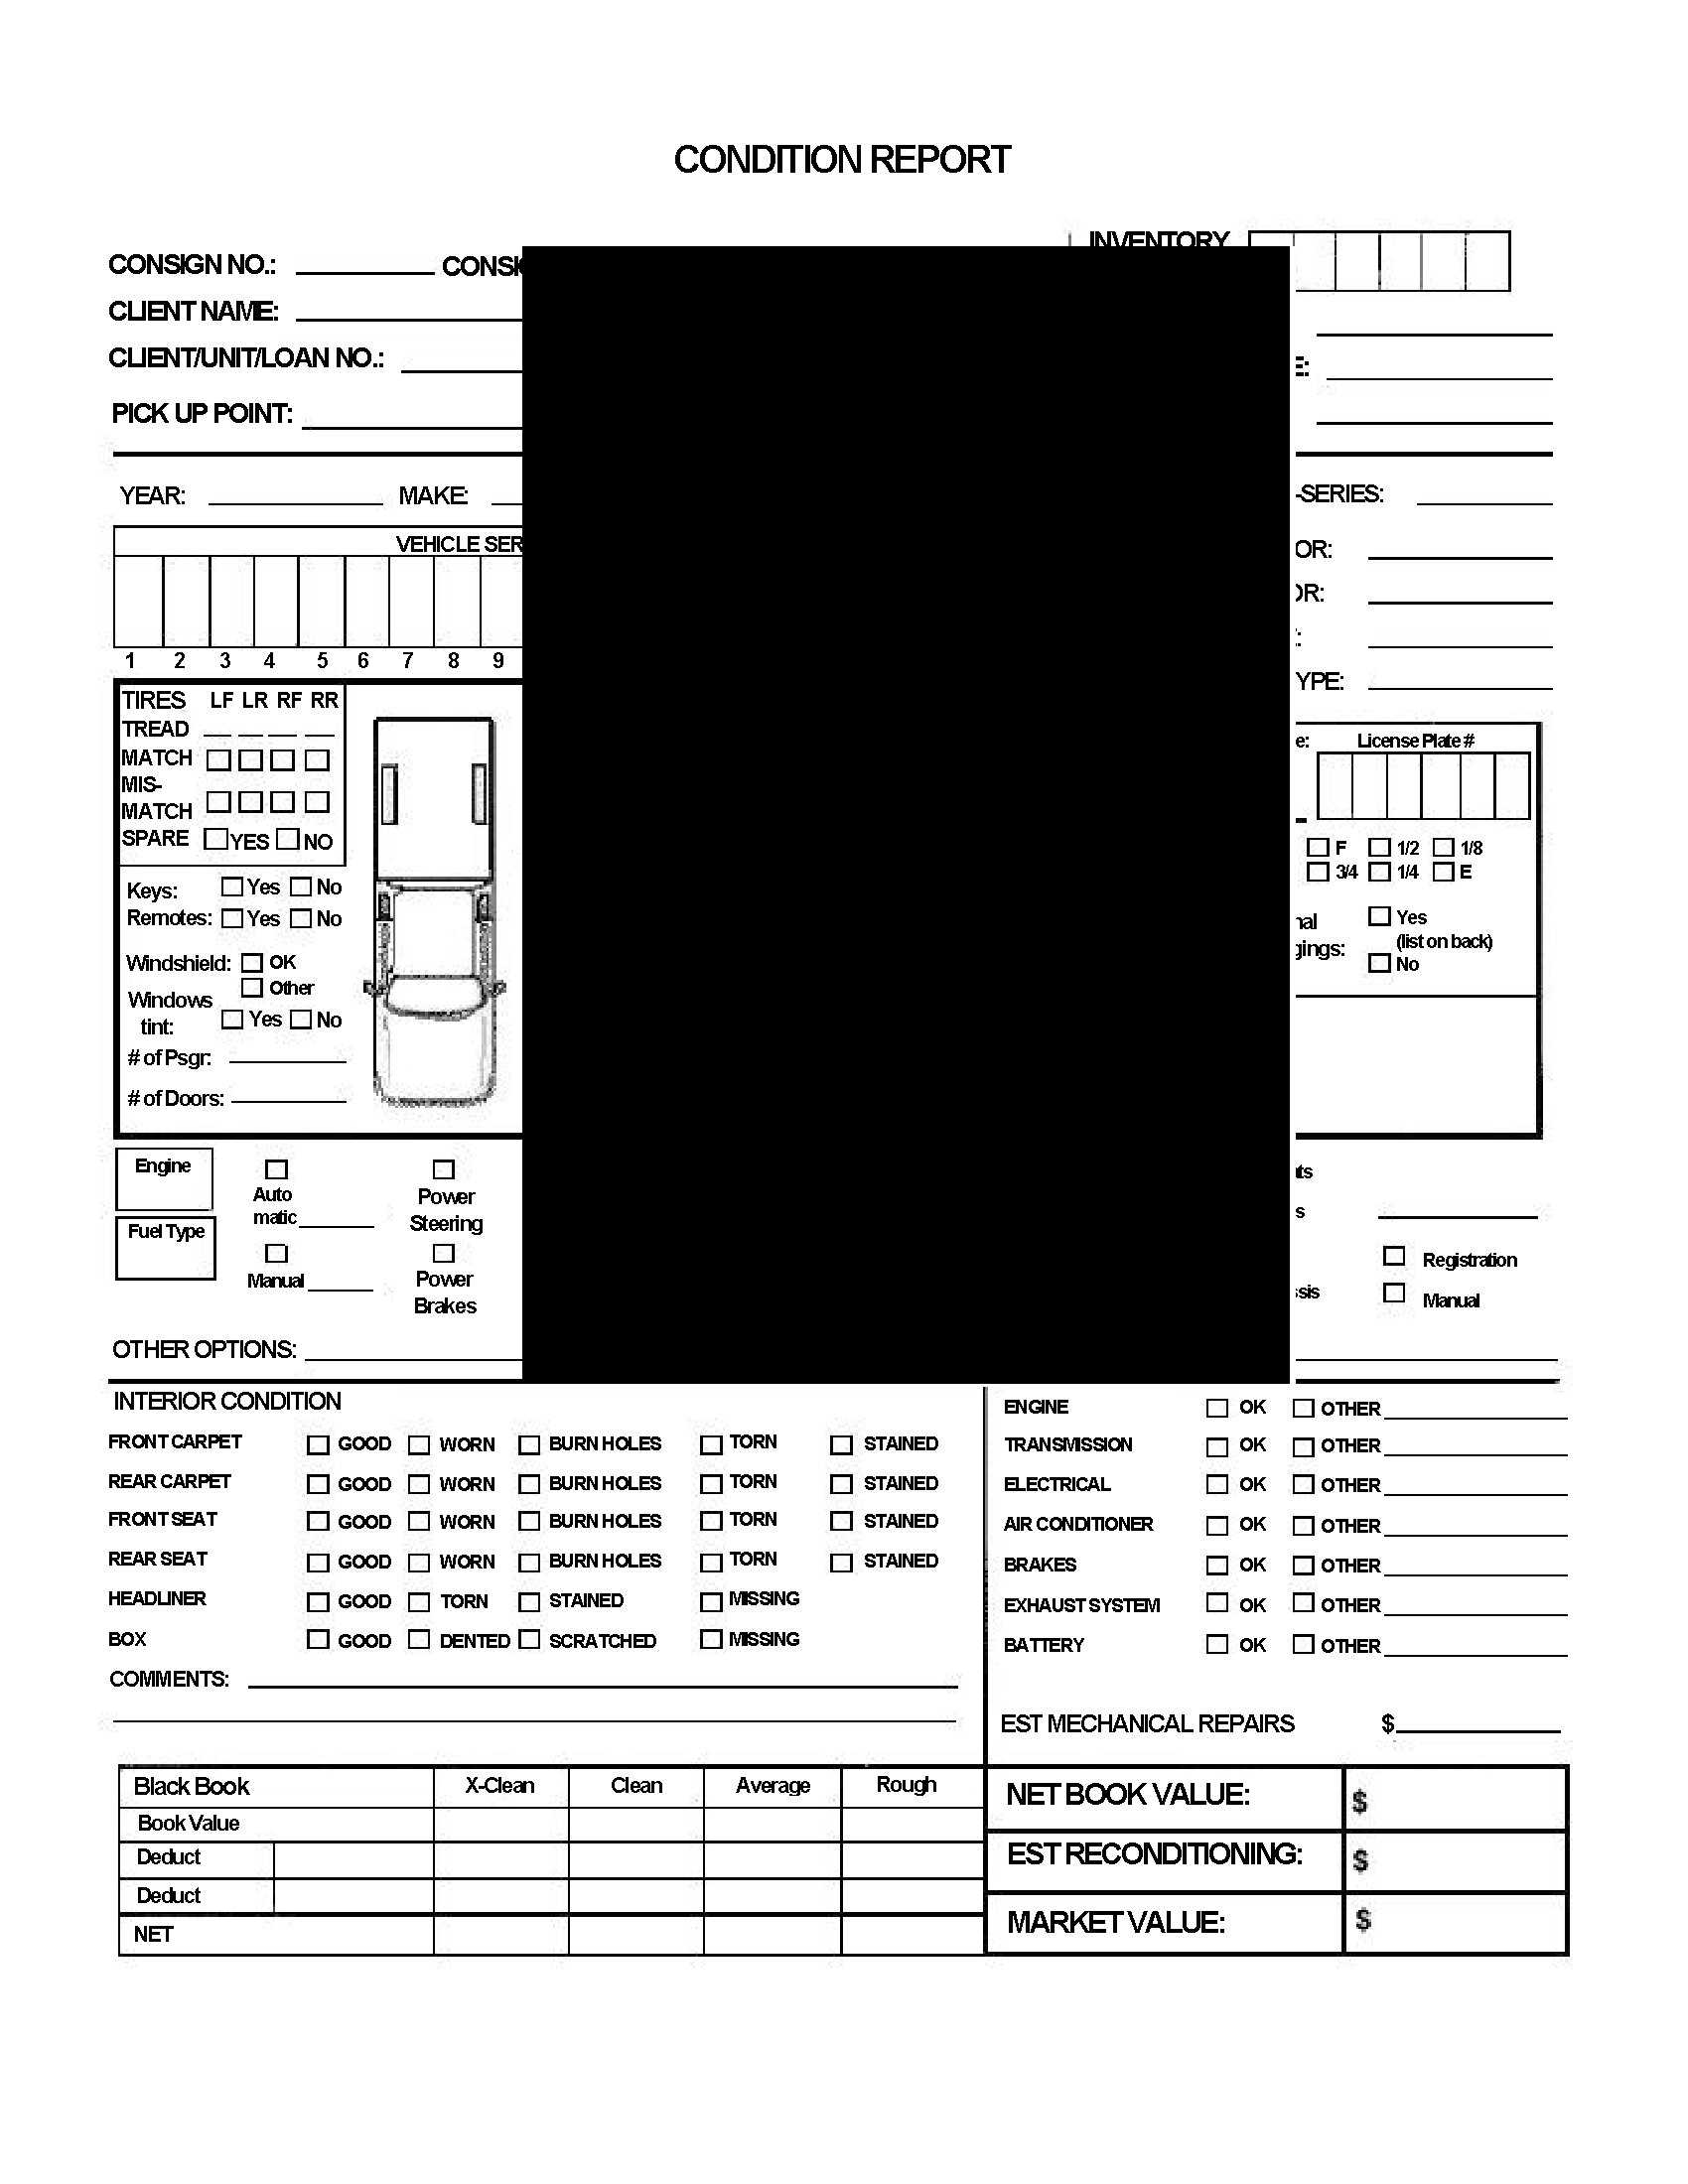 Truck Condition Report Template – 28 Images – Truck Regarding Truck Condition Report Template